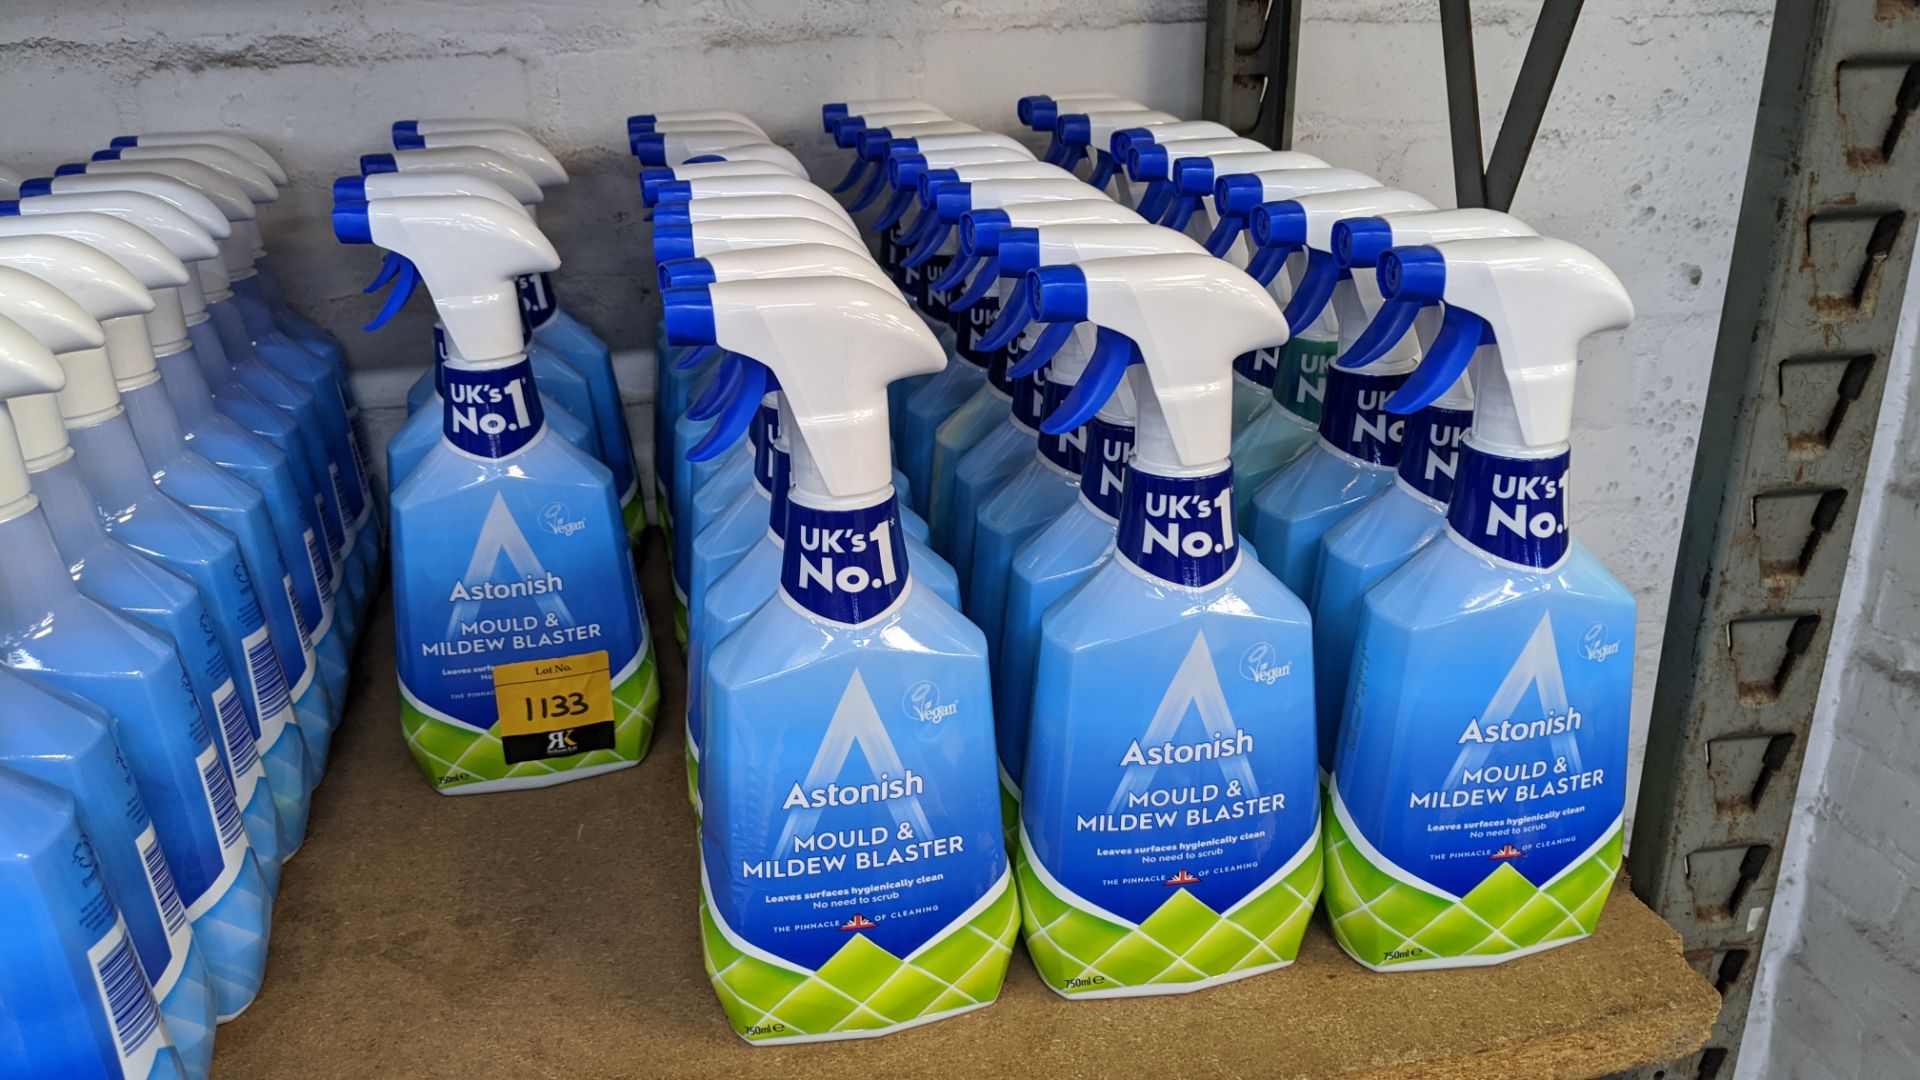 35 off 750ml bottles of Astonish Mould & Mildew Blaster. IMPORTANT – DO NOT BID BEFORE READING THE - Image 2 of 2